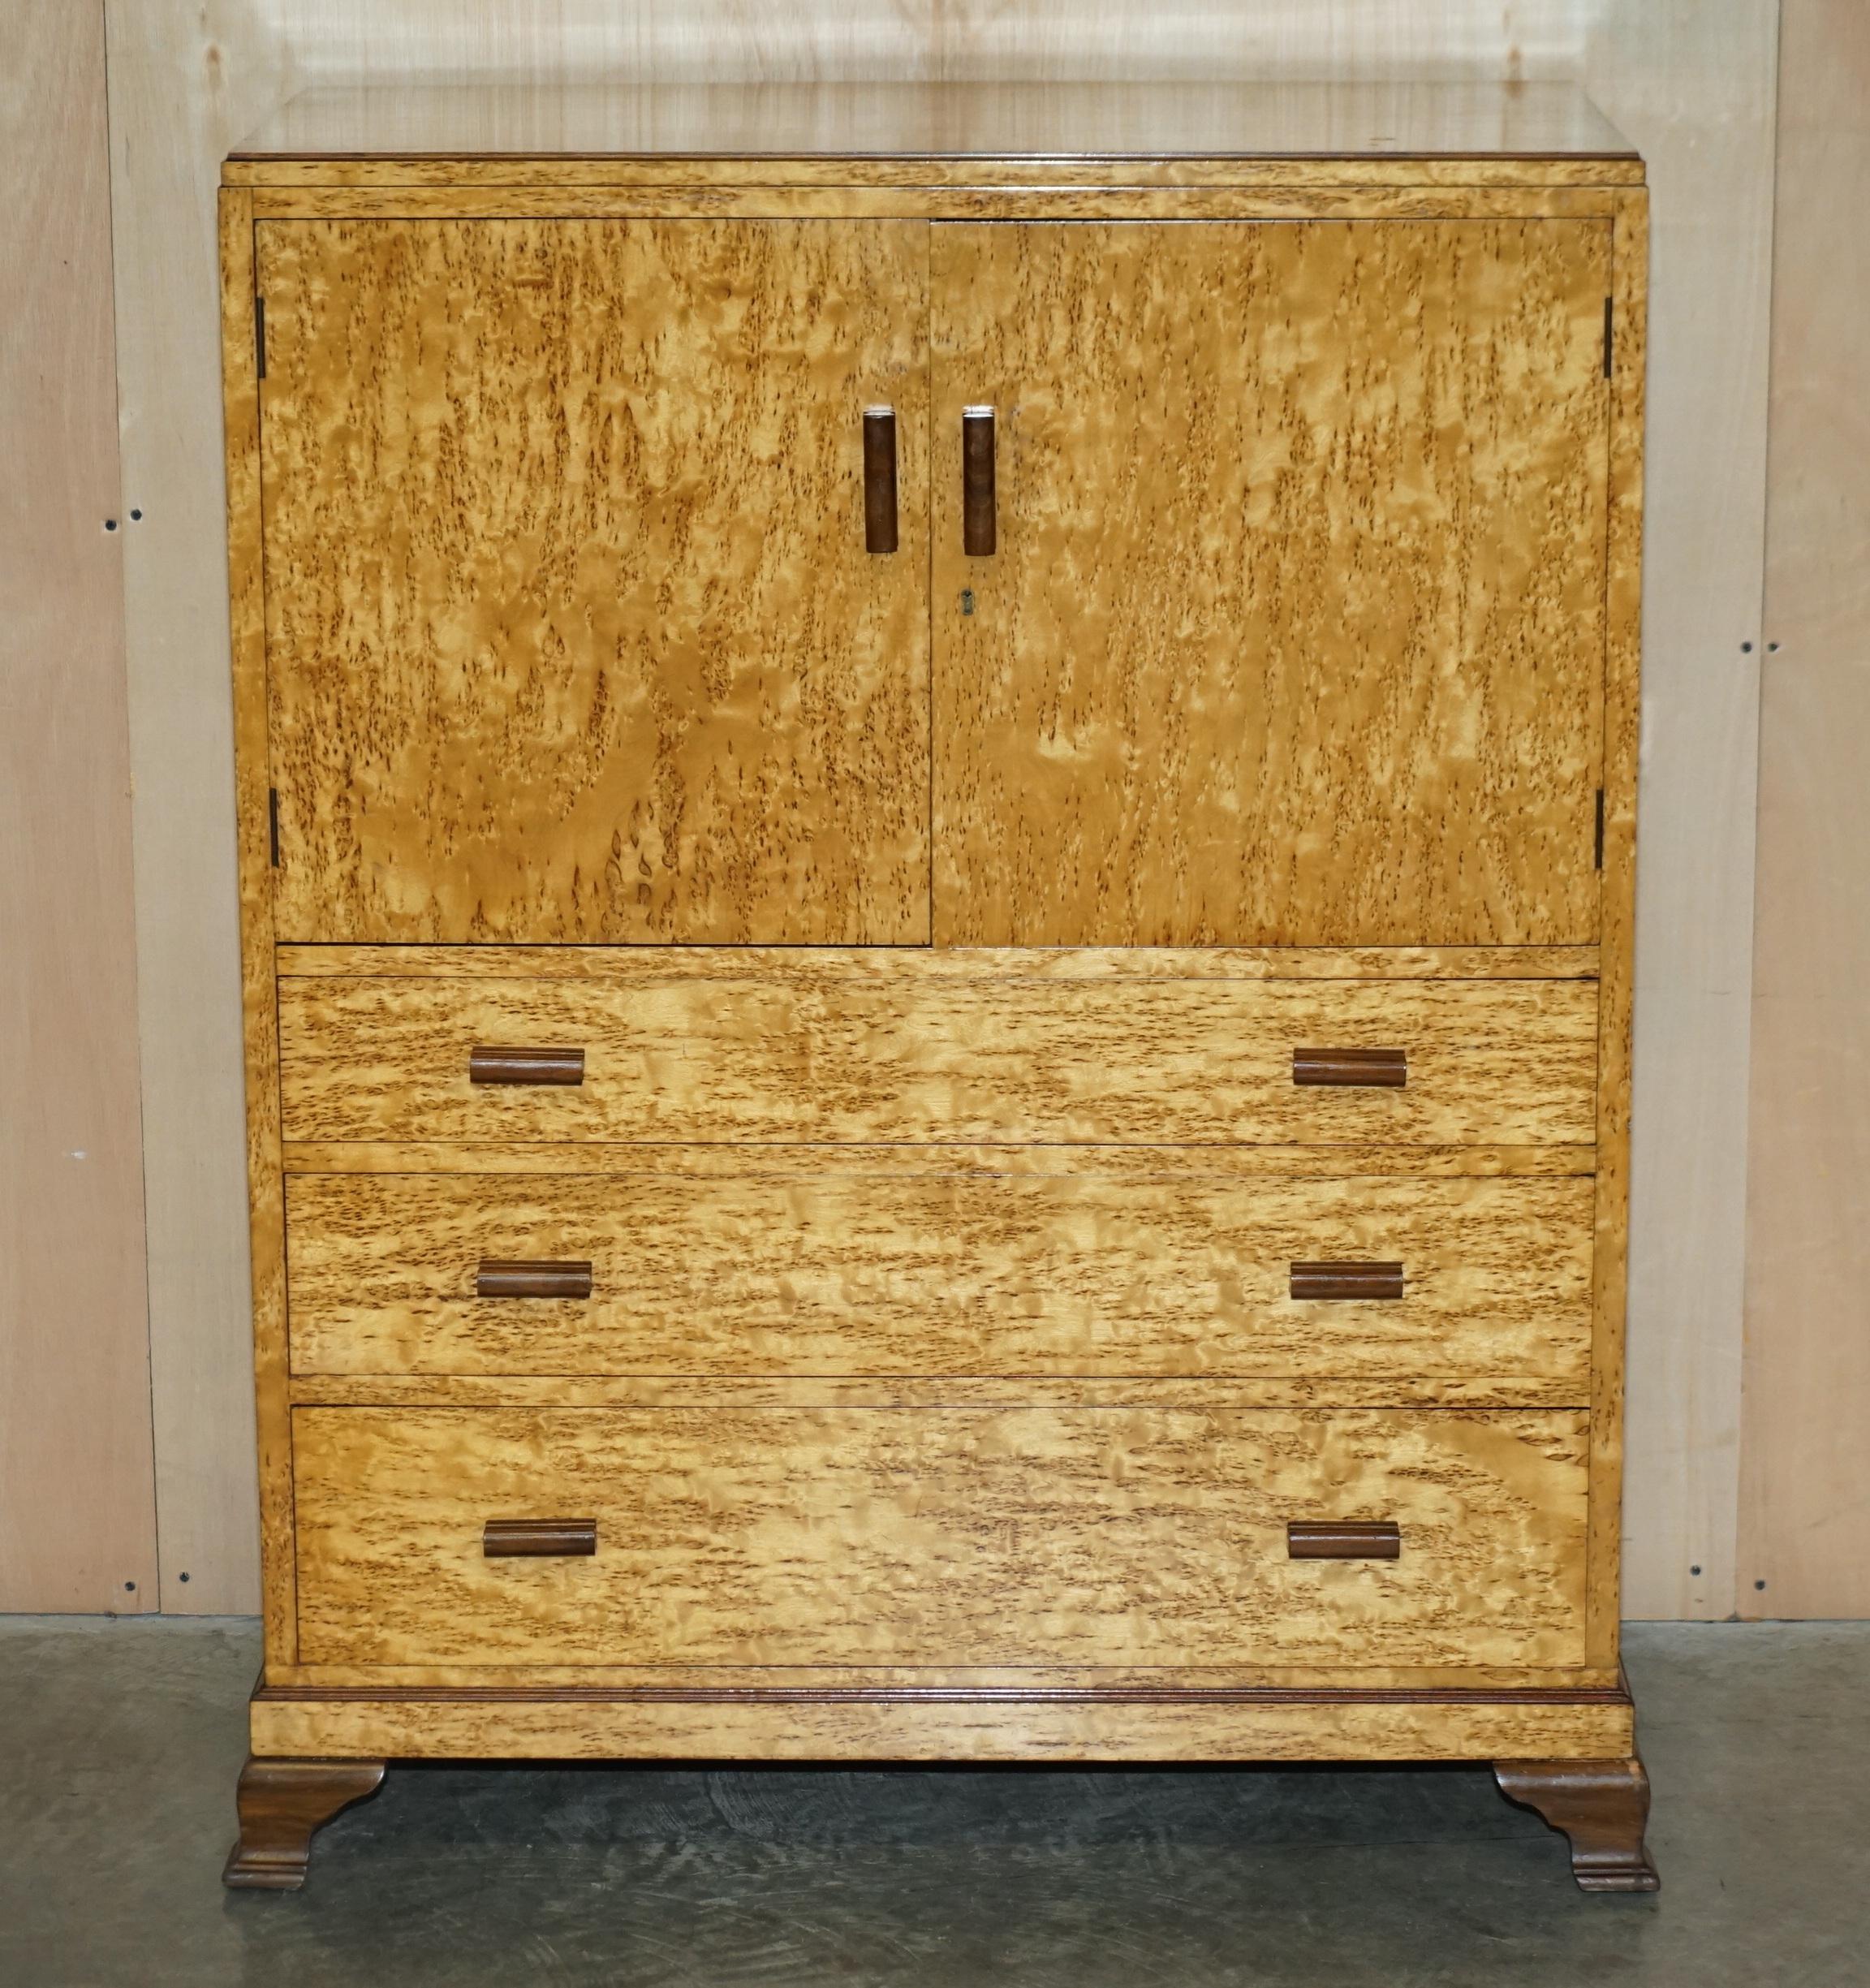 We are delighted to offer for sale this stunning original Art Deco Burr Maple Housekeepers cupboard with a chest of drawers base.

This is part of a suite, in total I have a side chair, dressing table stool, side cupboard, large double wardrobe,